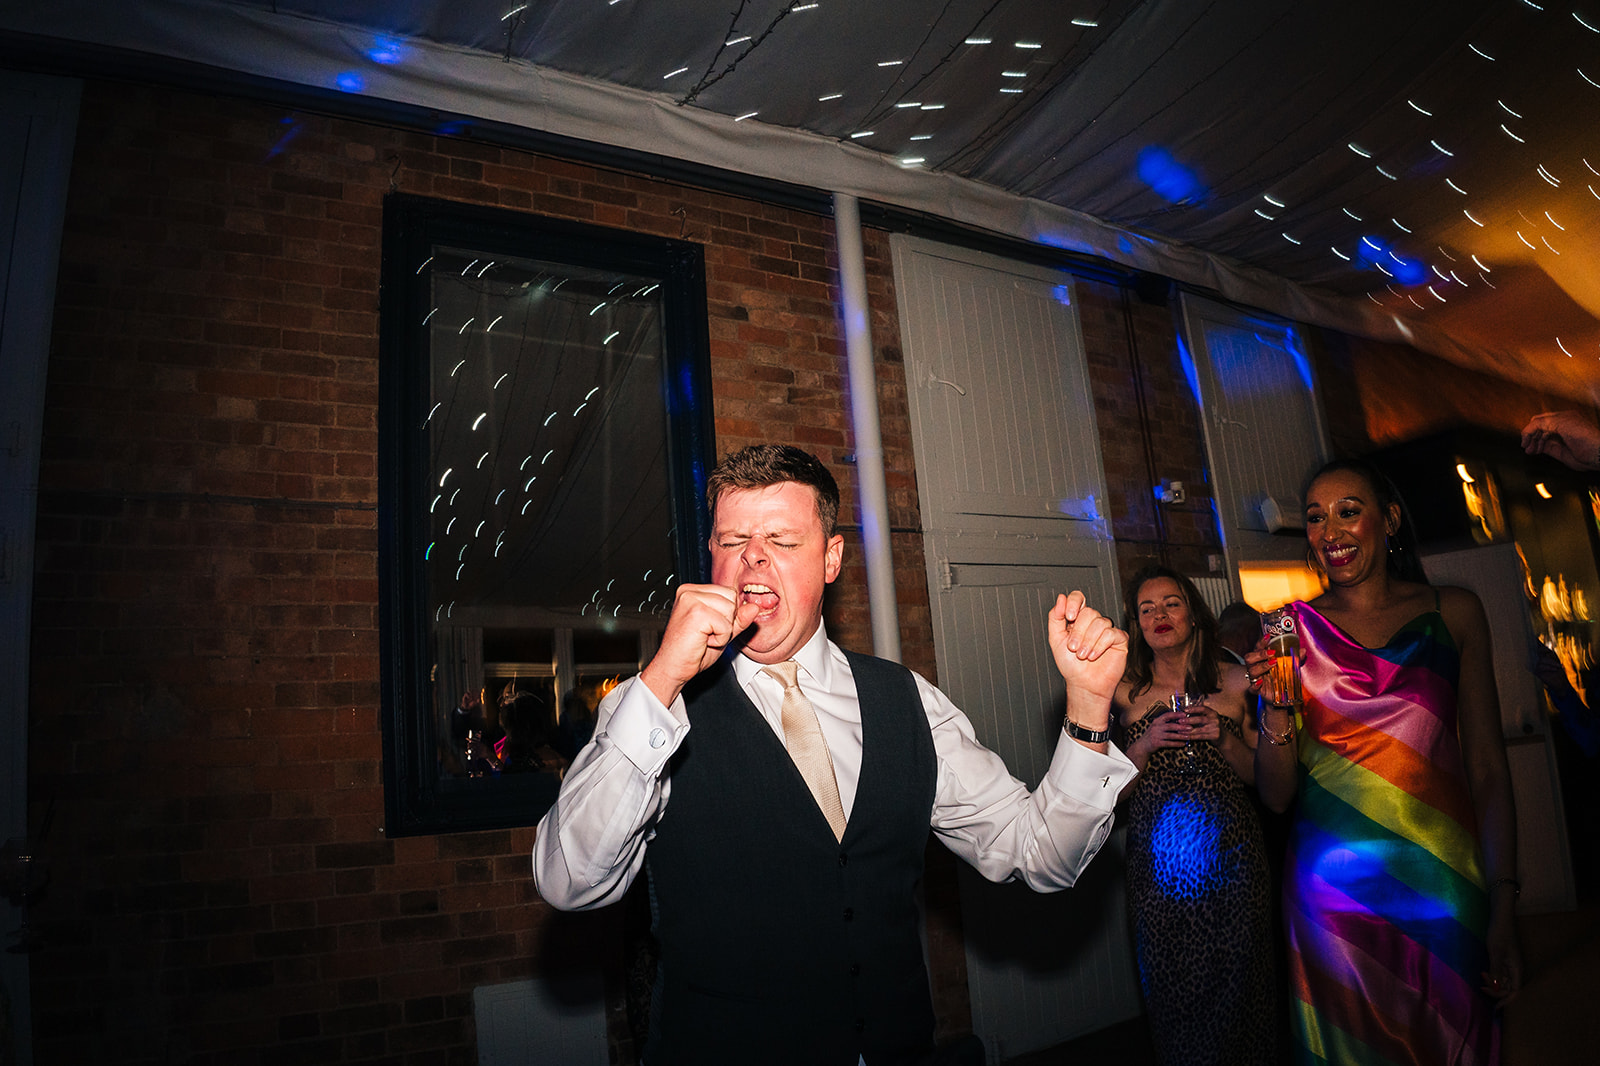 The groom pretending to sing to a song play by the live band at Norwood Park